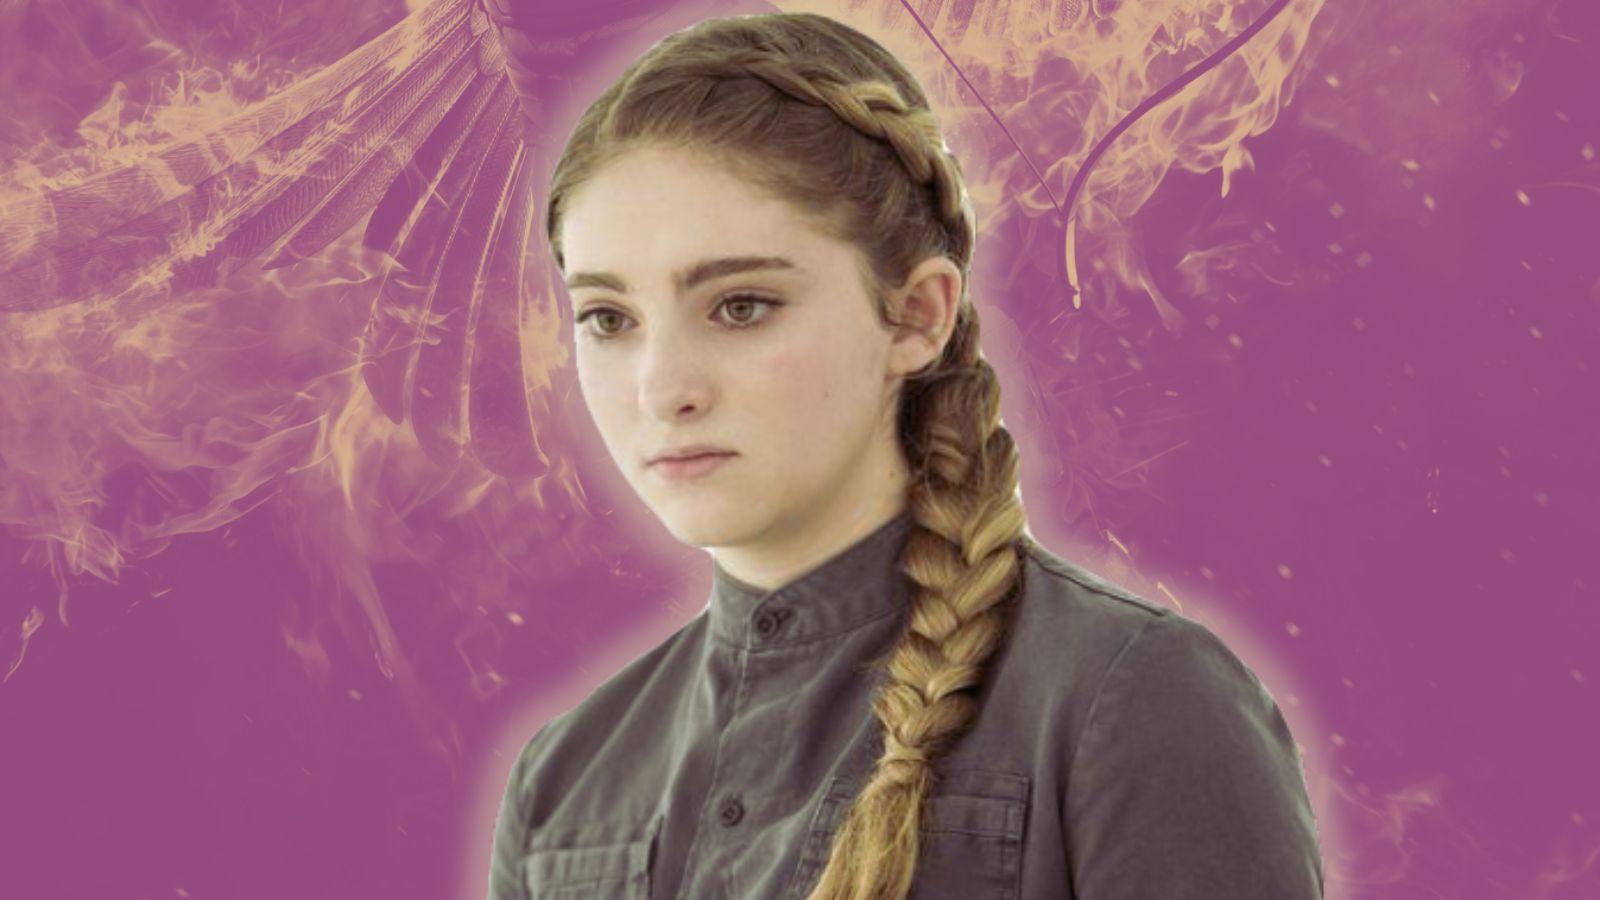 Willow Shields as Primrose Everdeen in The Hunger Games: Mockingjay Part 1.